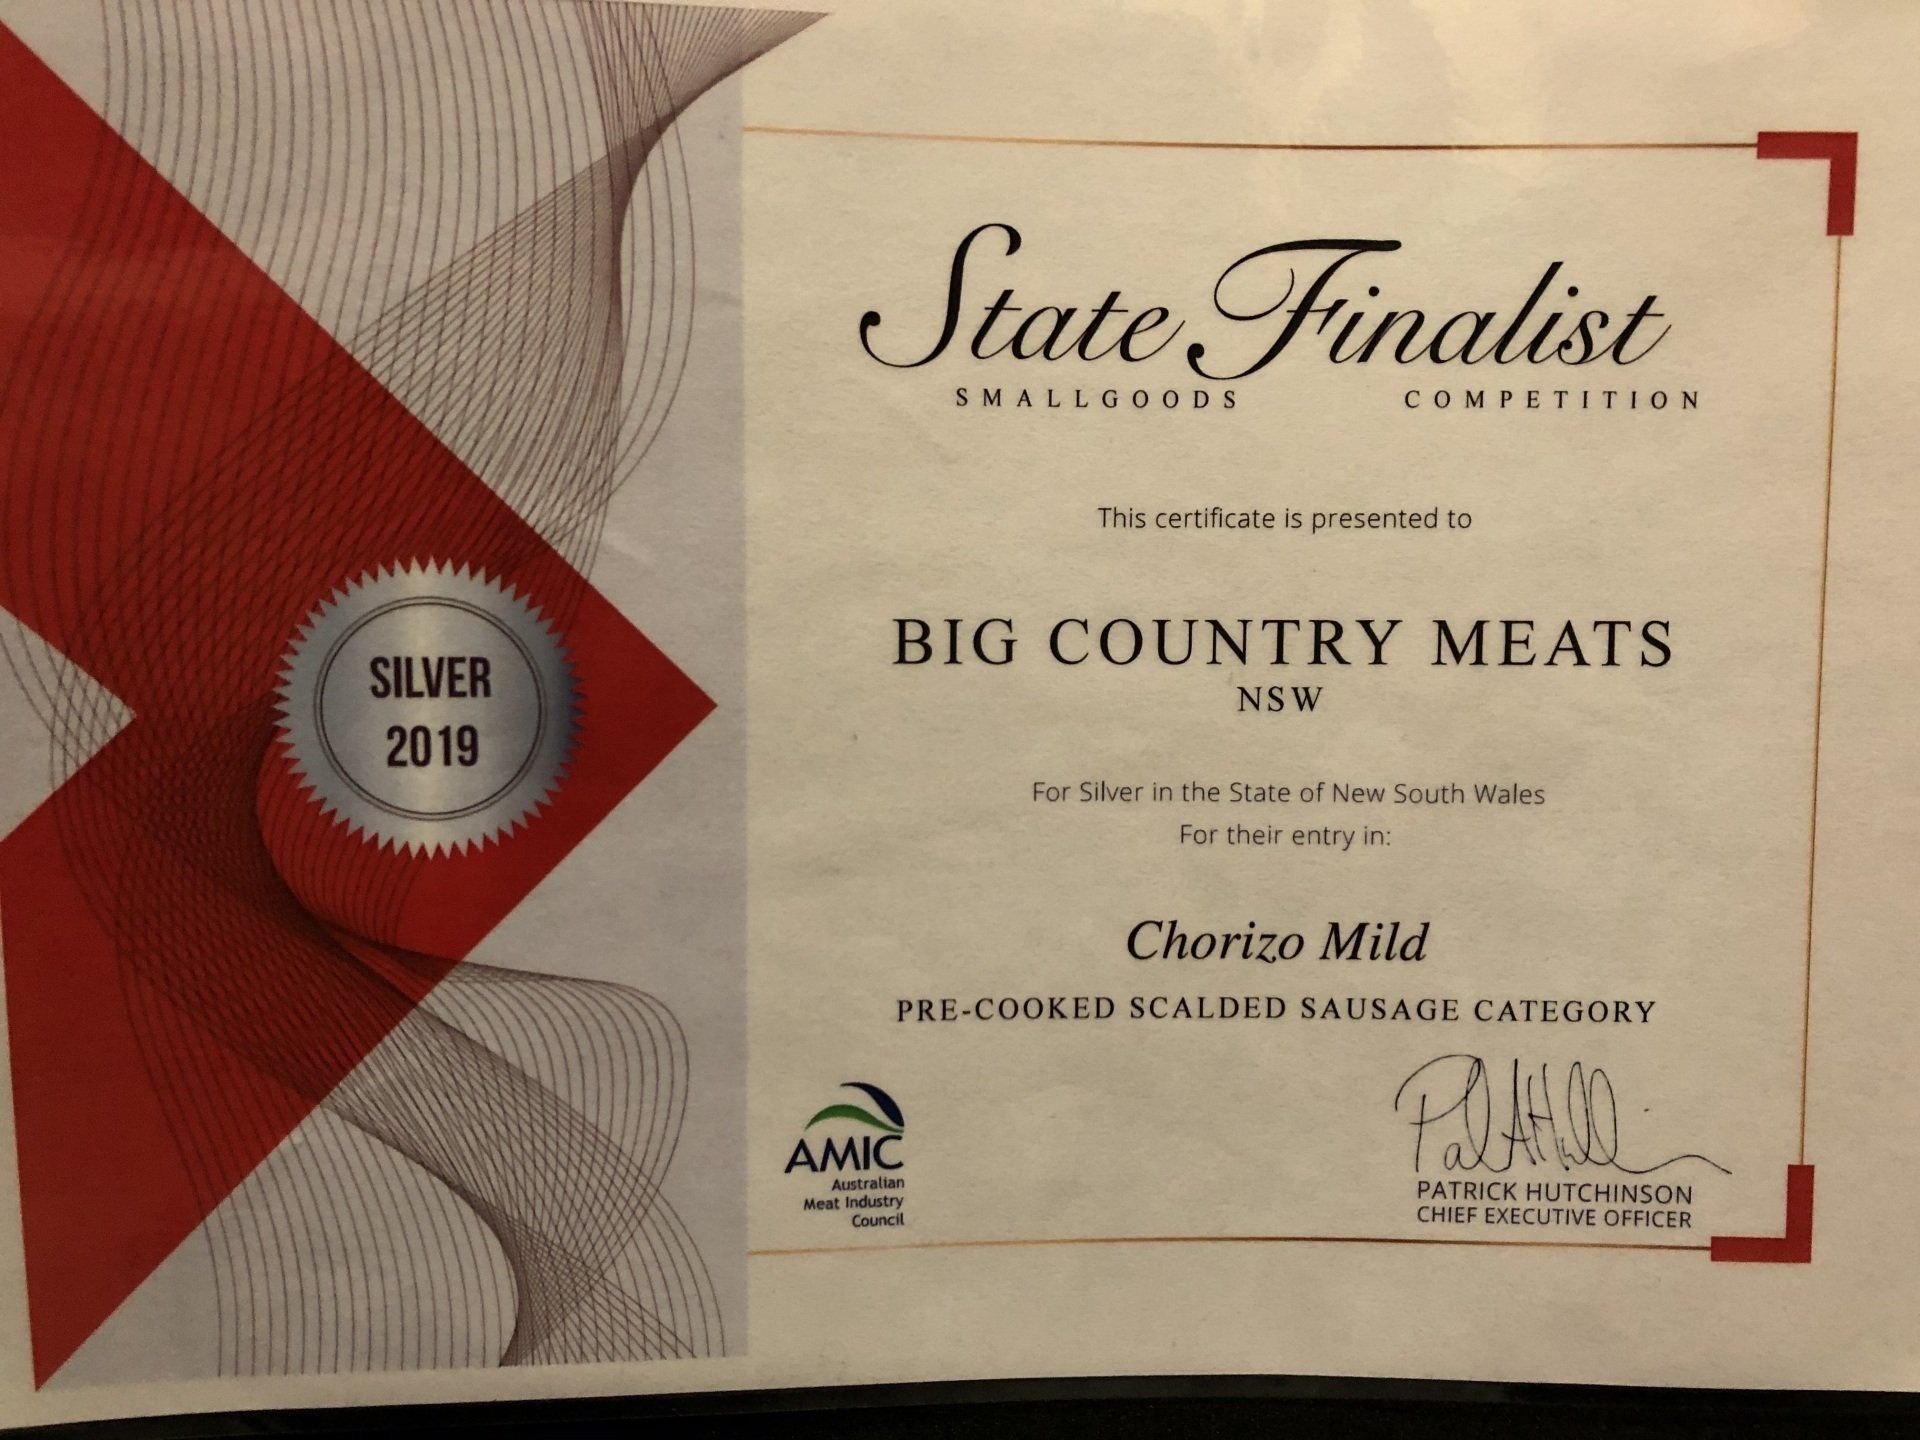 Silver in the 2019 State Smallgoods Competition for Chorizo